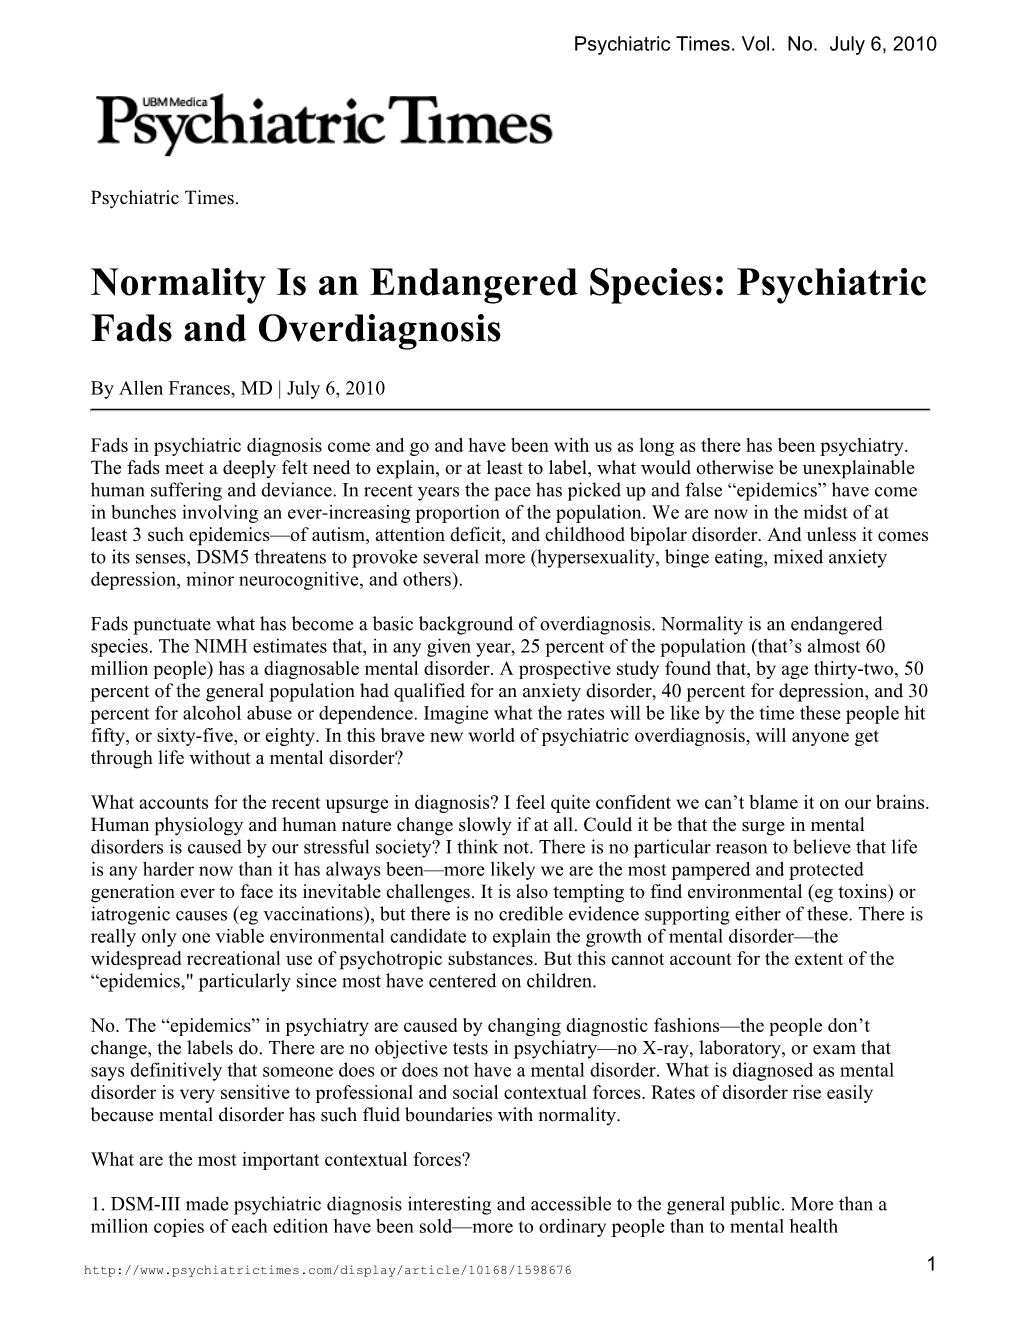 Normality Is an Endangered Species: Psychiatric Fads and Overdiagnosis